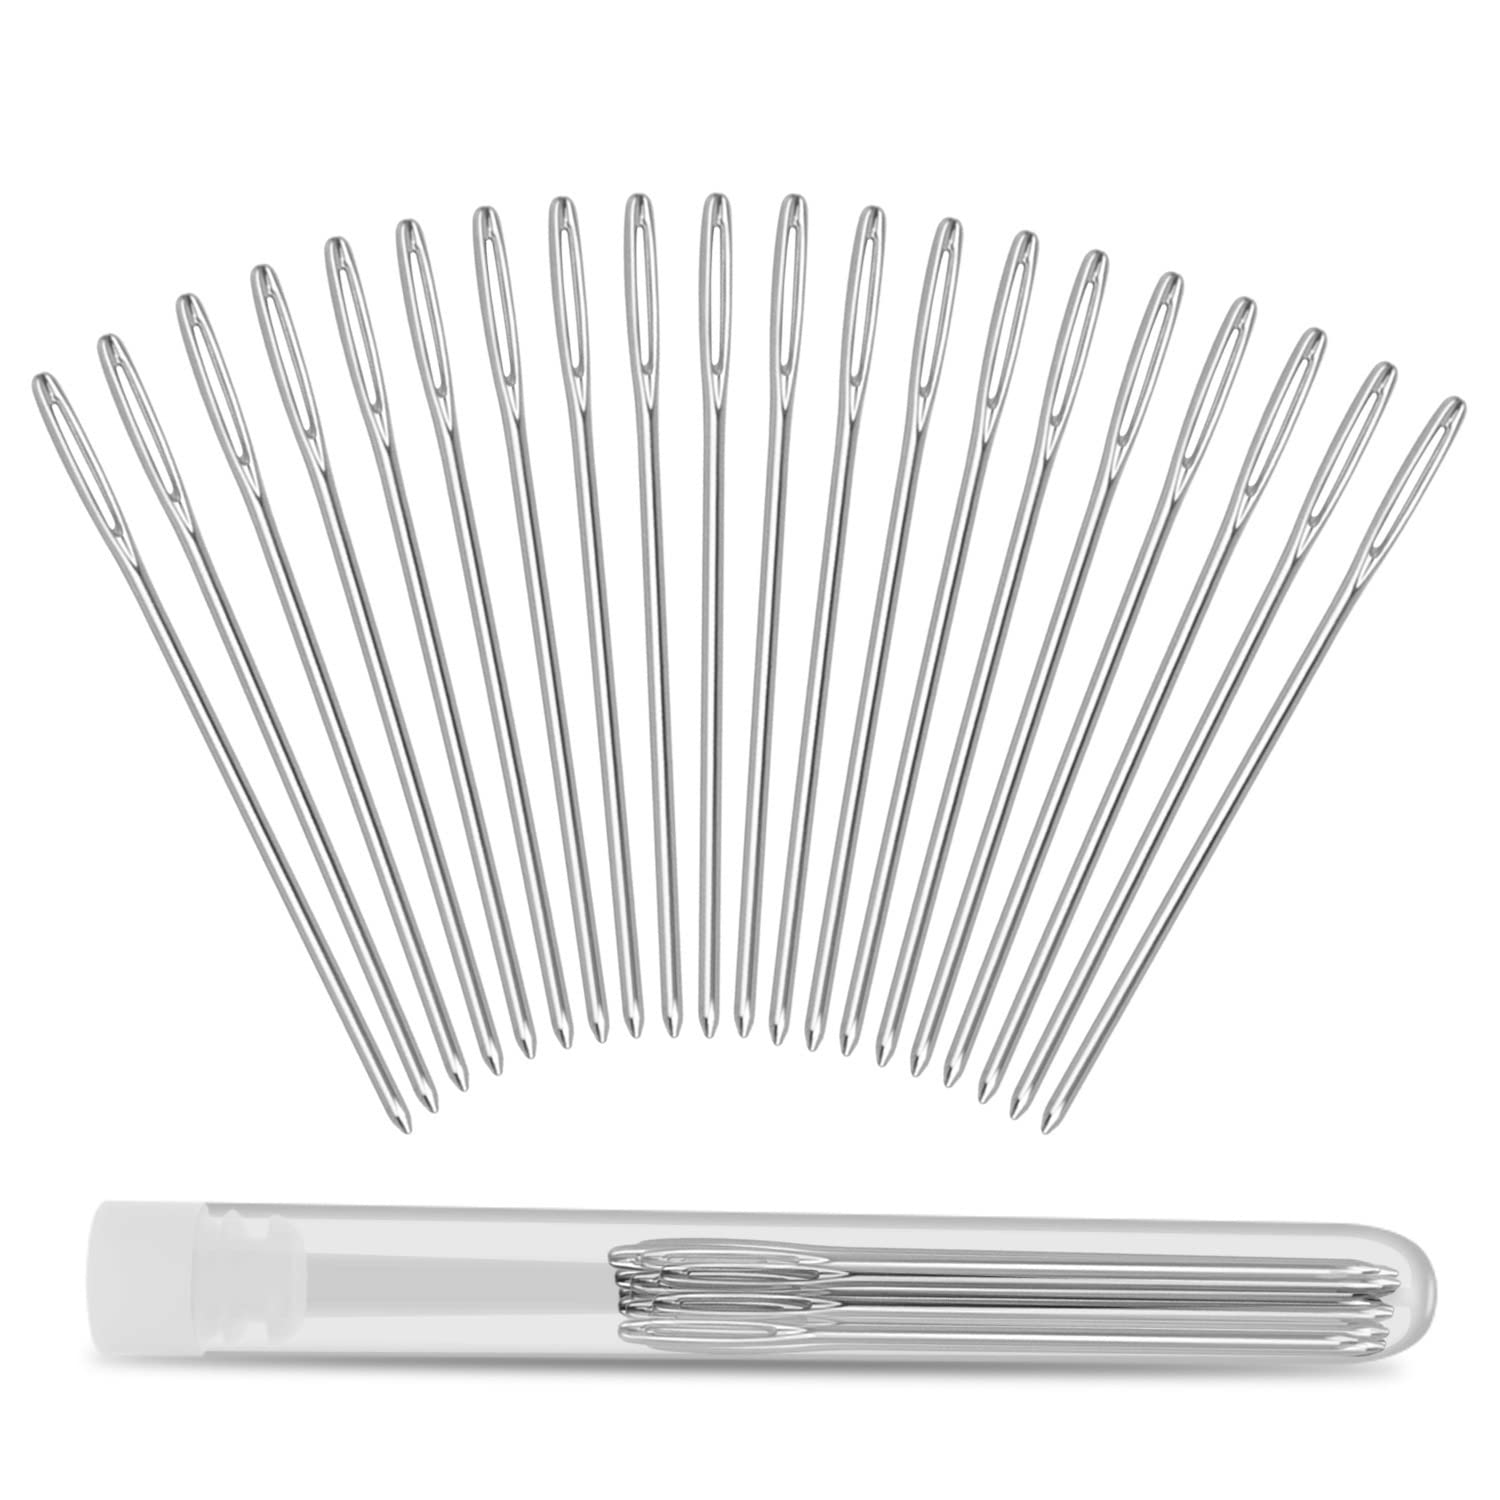 ERKOON 20 Pieces Large-Eye Blunt Needles 52mm Large Eye Sewing Needles  Stainless Steel Stitching Needles with Clear Bottle for Leather Projects